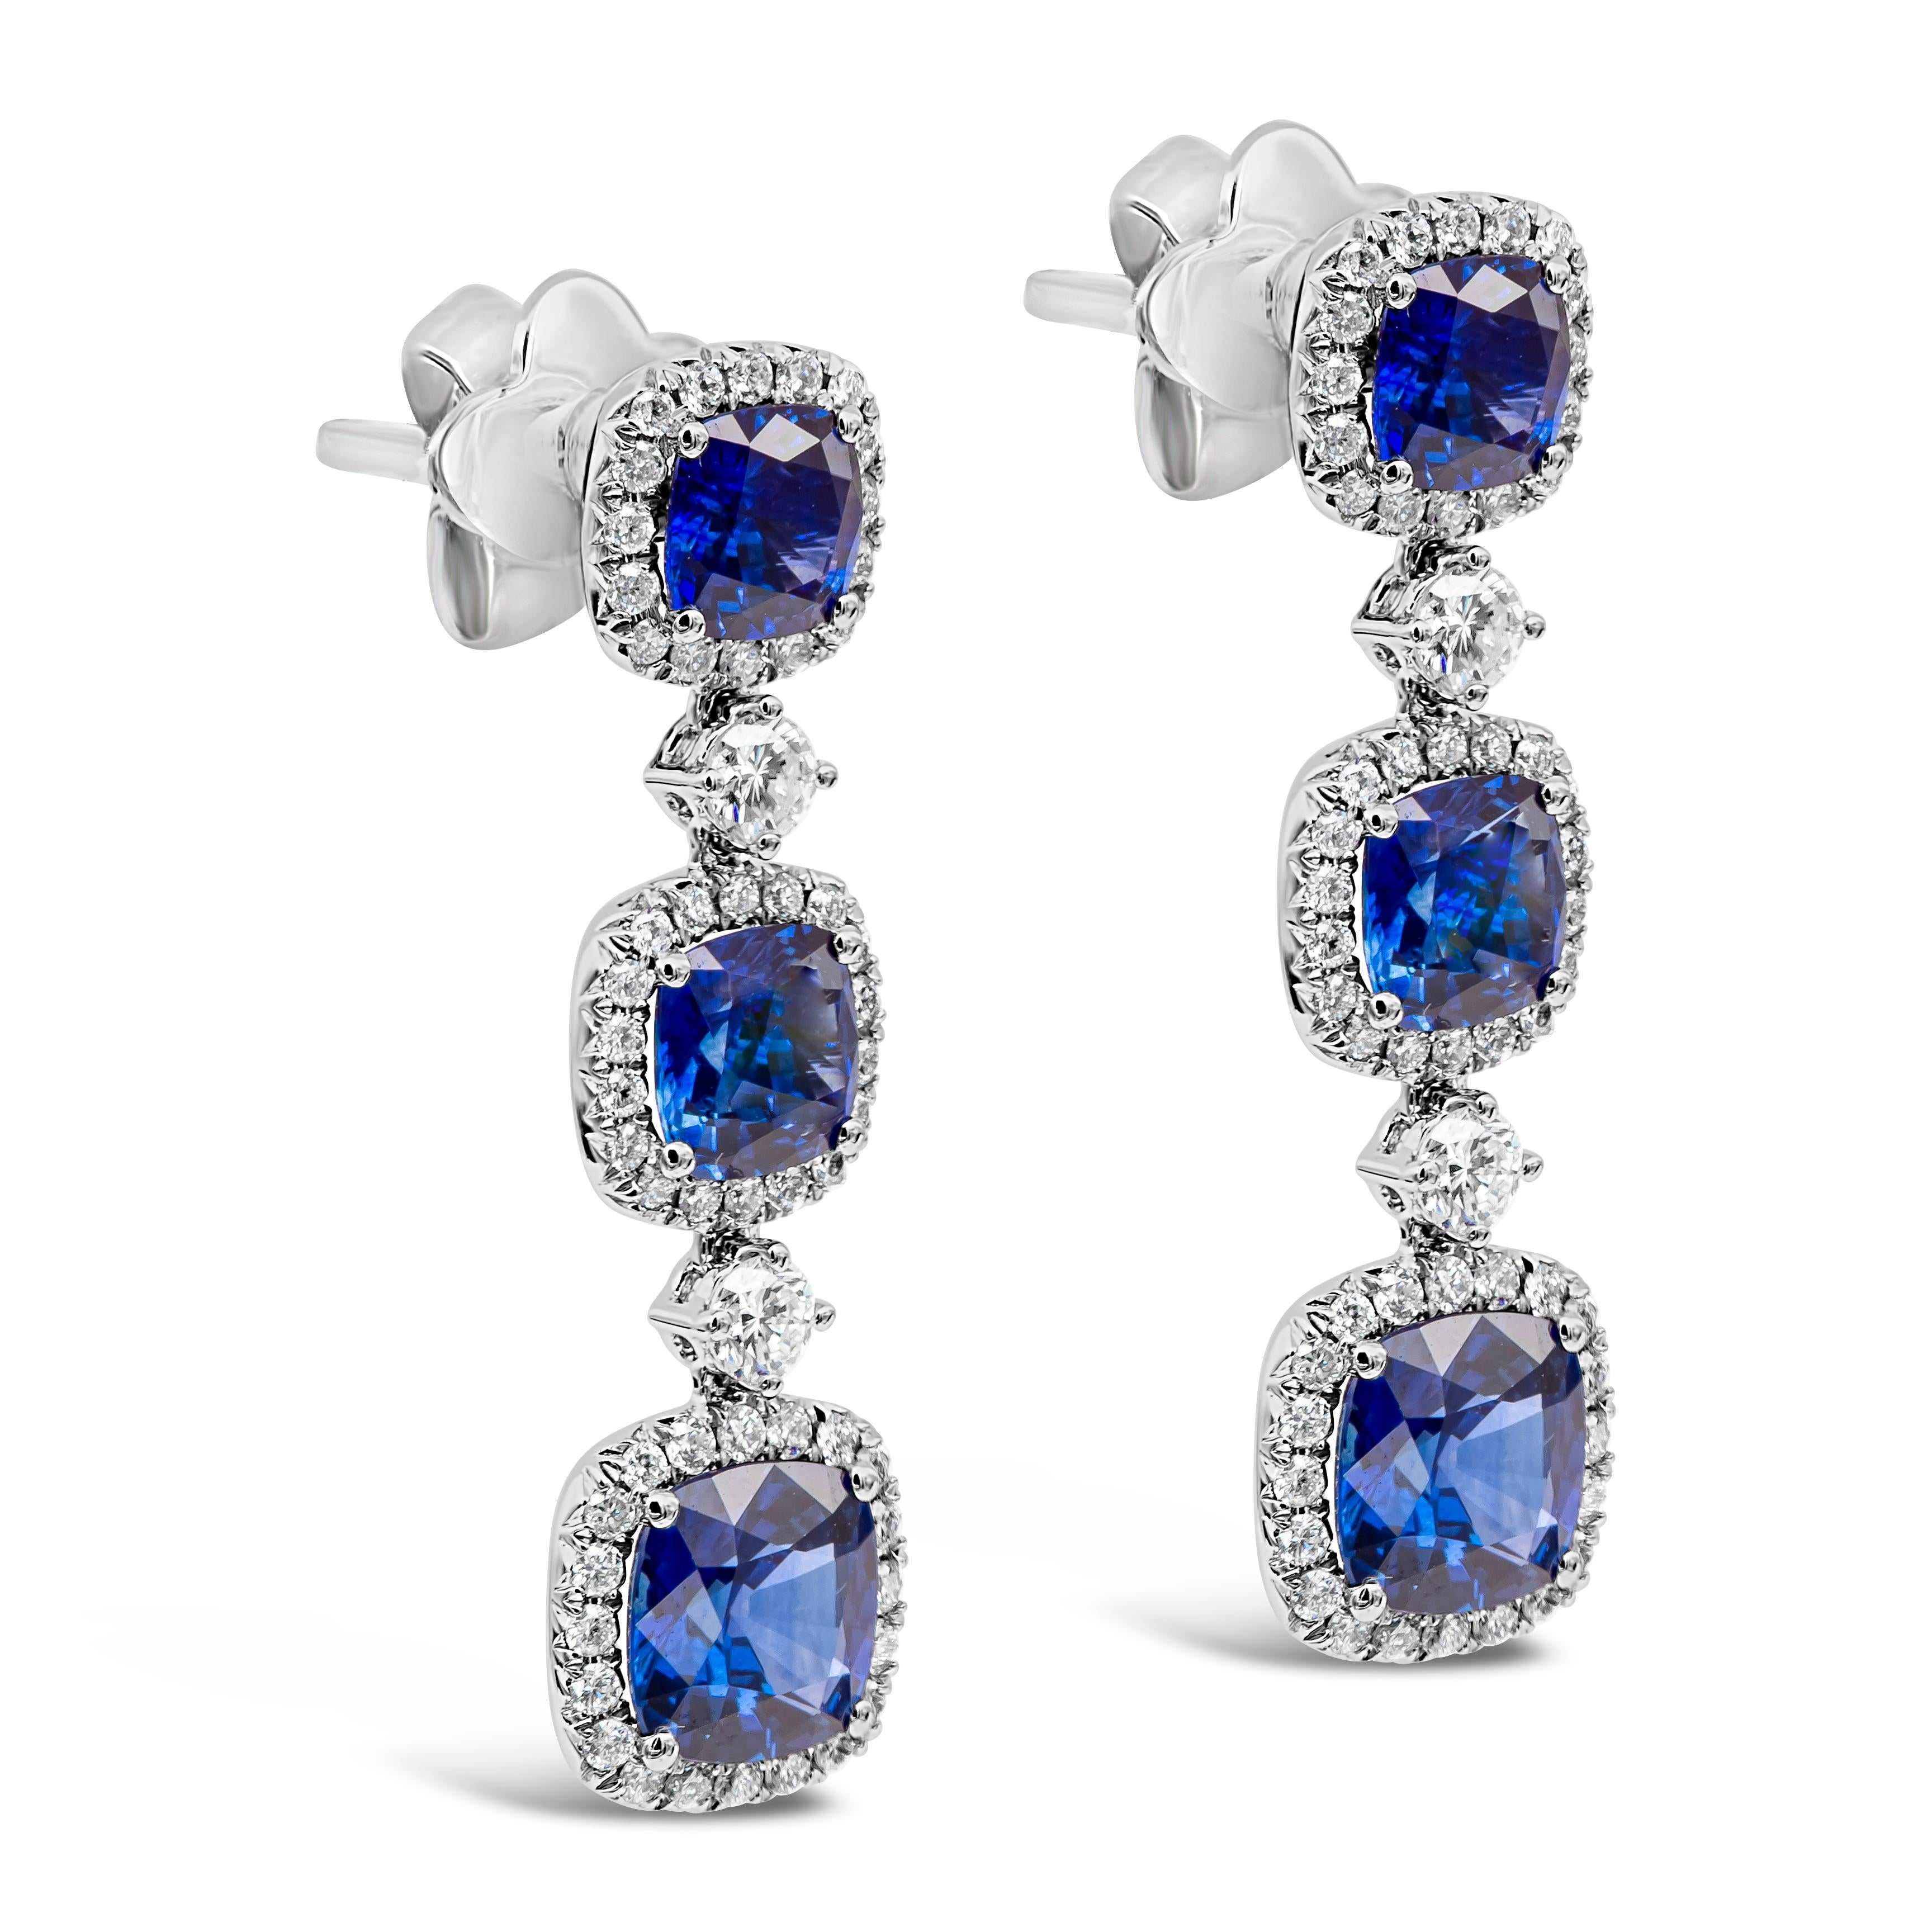 This extravagant dangle drop earrings features a row of cushion cut blue sapphires weighing 4.51 carats total, each set in a brilliant diamond halo. Diamonds weigh 0.73 carats total. Made in 18k white gold.

Style available in different price